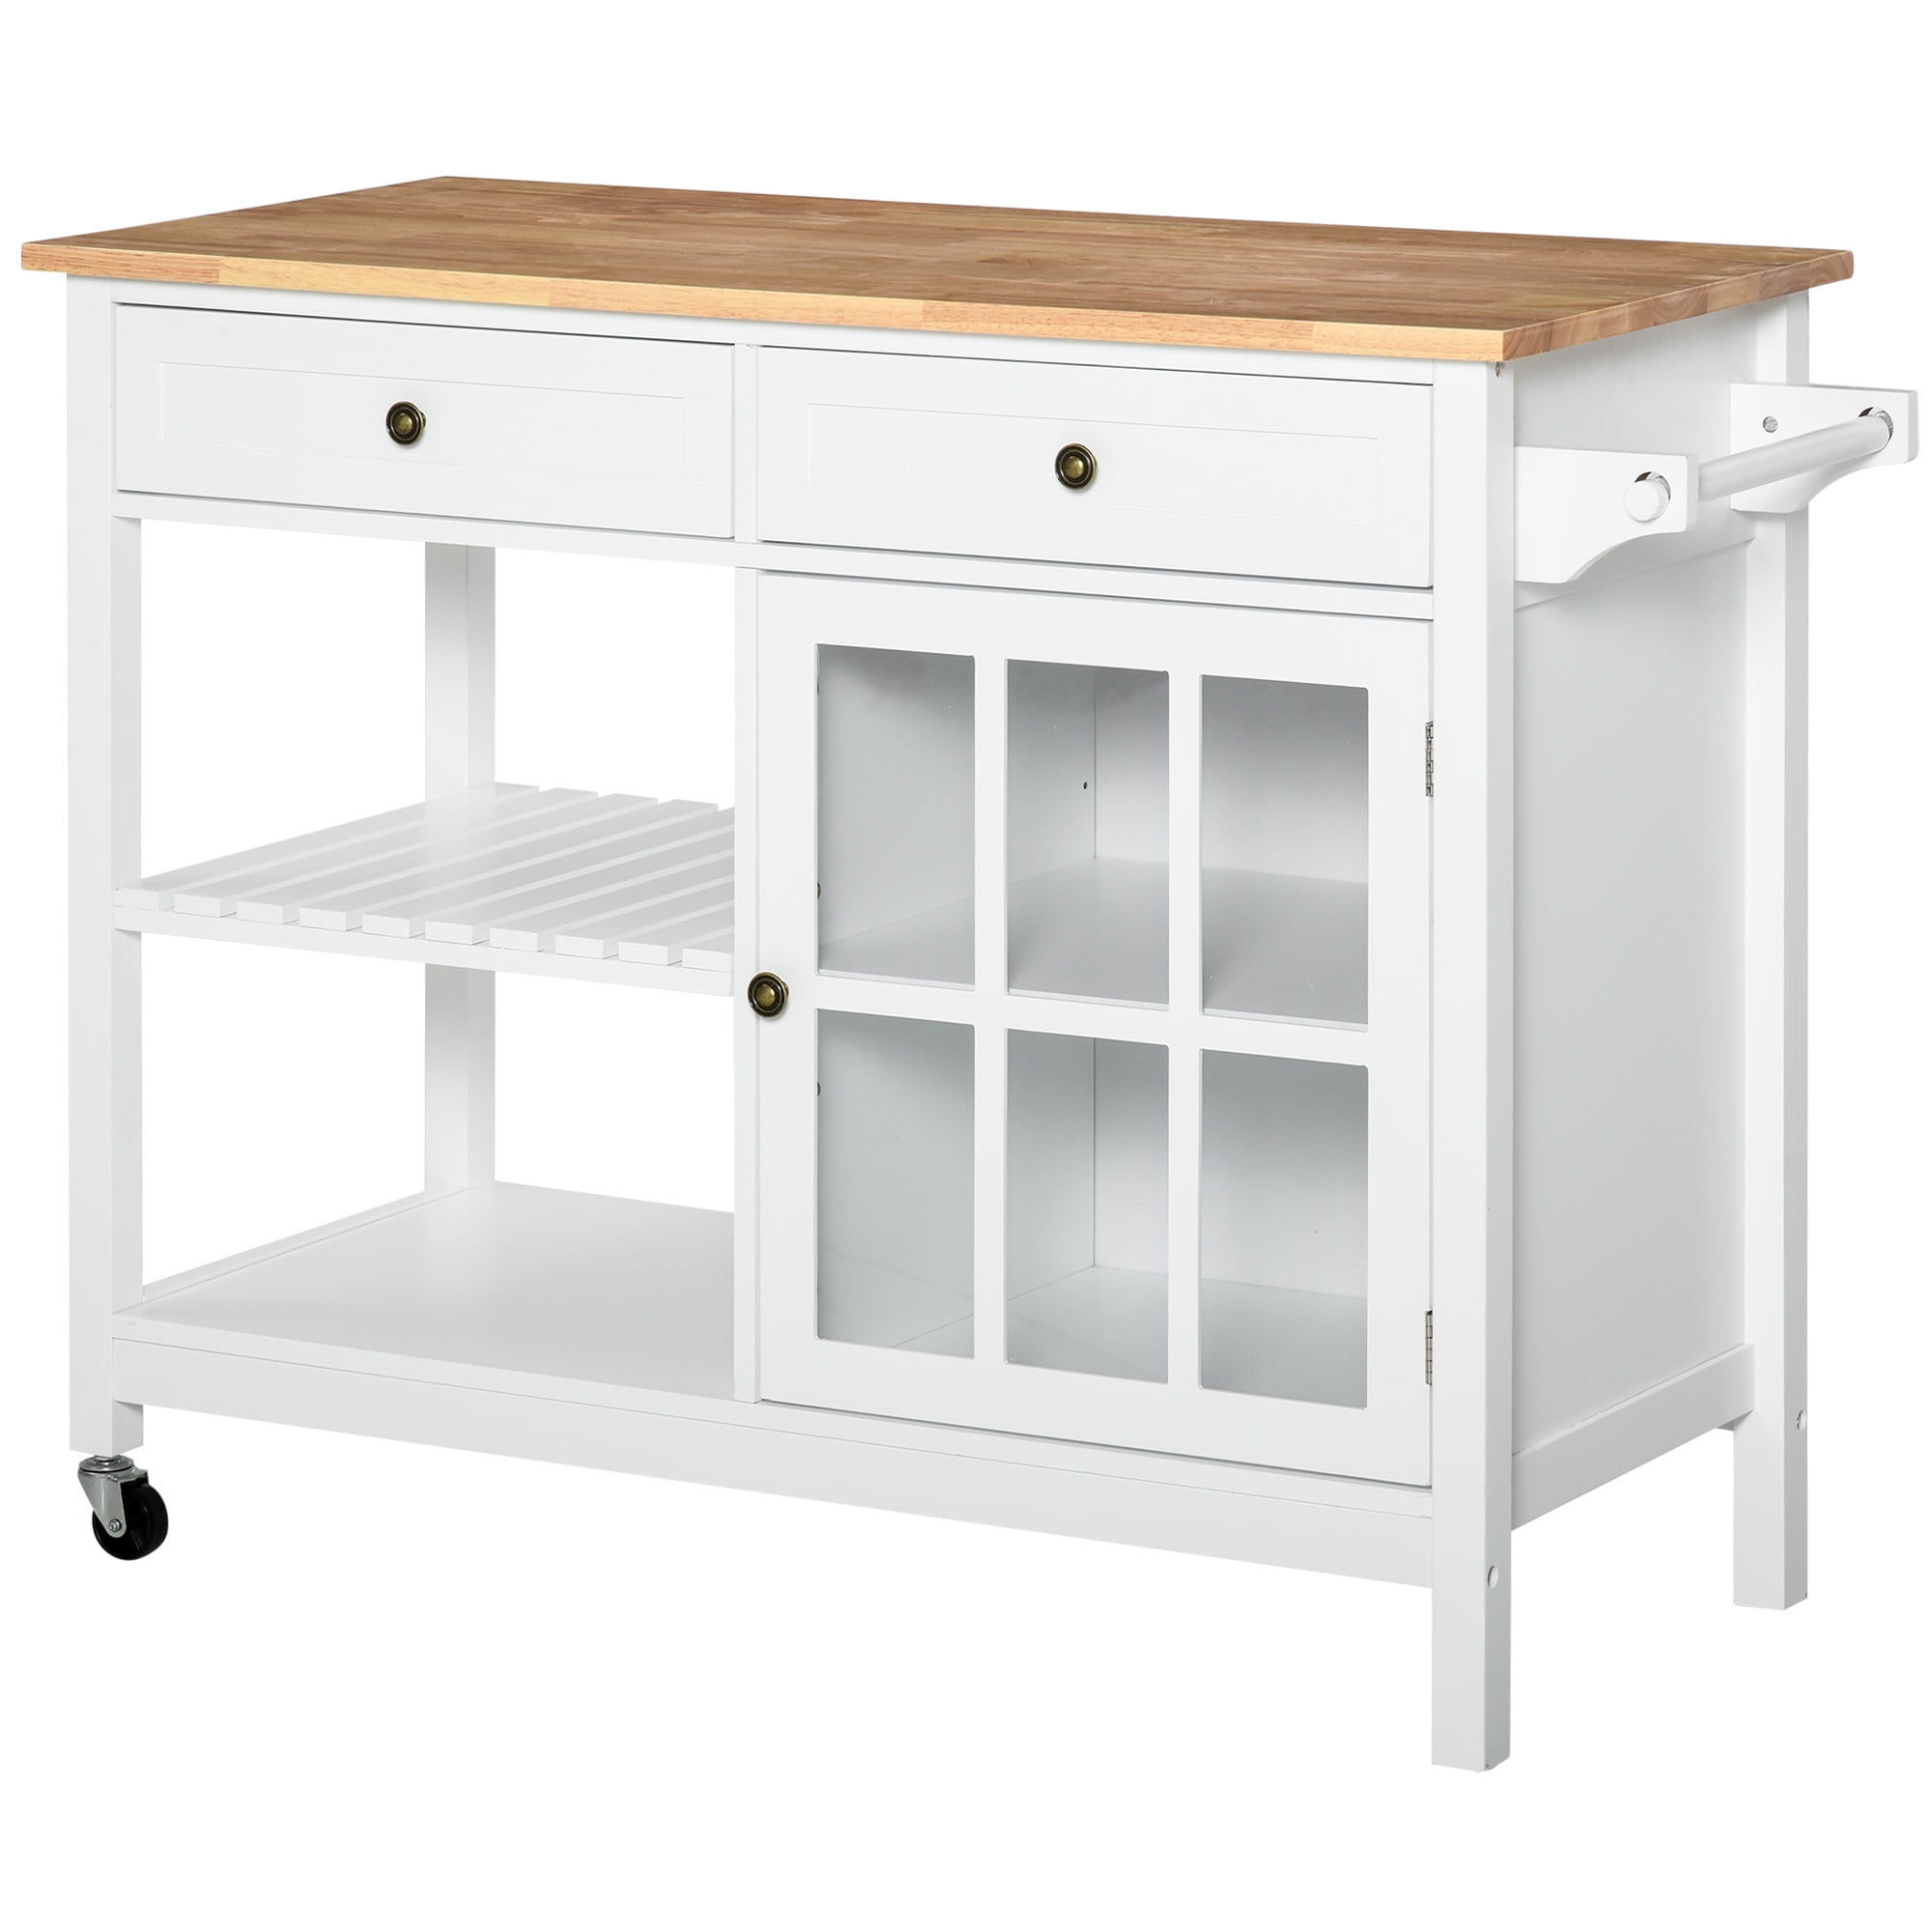 HOMCOM Kitchen Island Utility Storage Cart with Rubber Wood Top, Towel